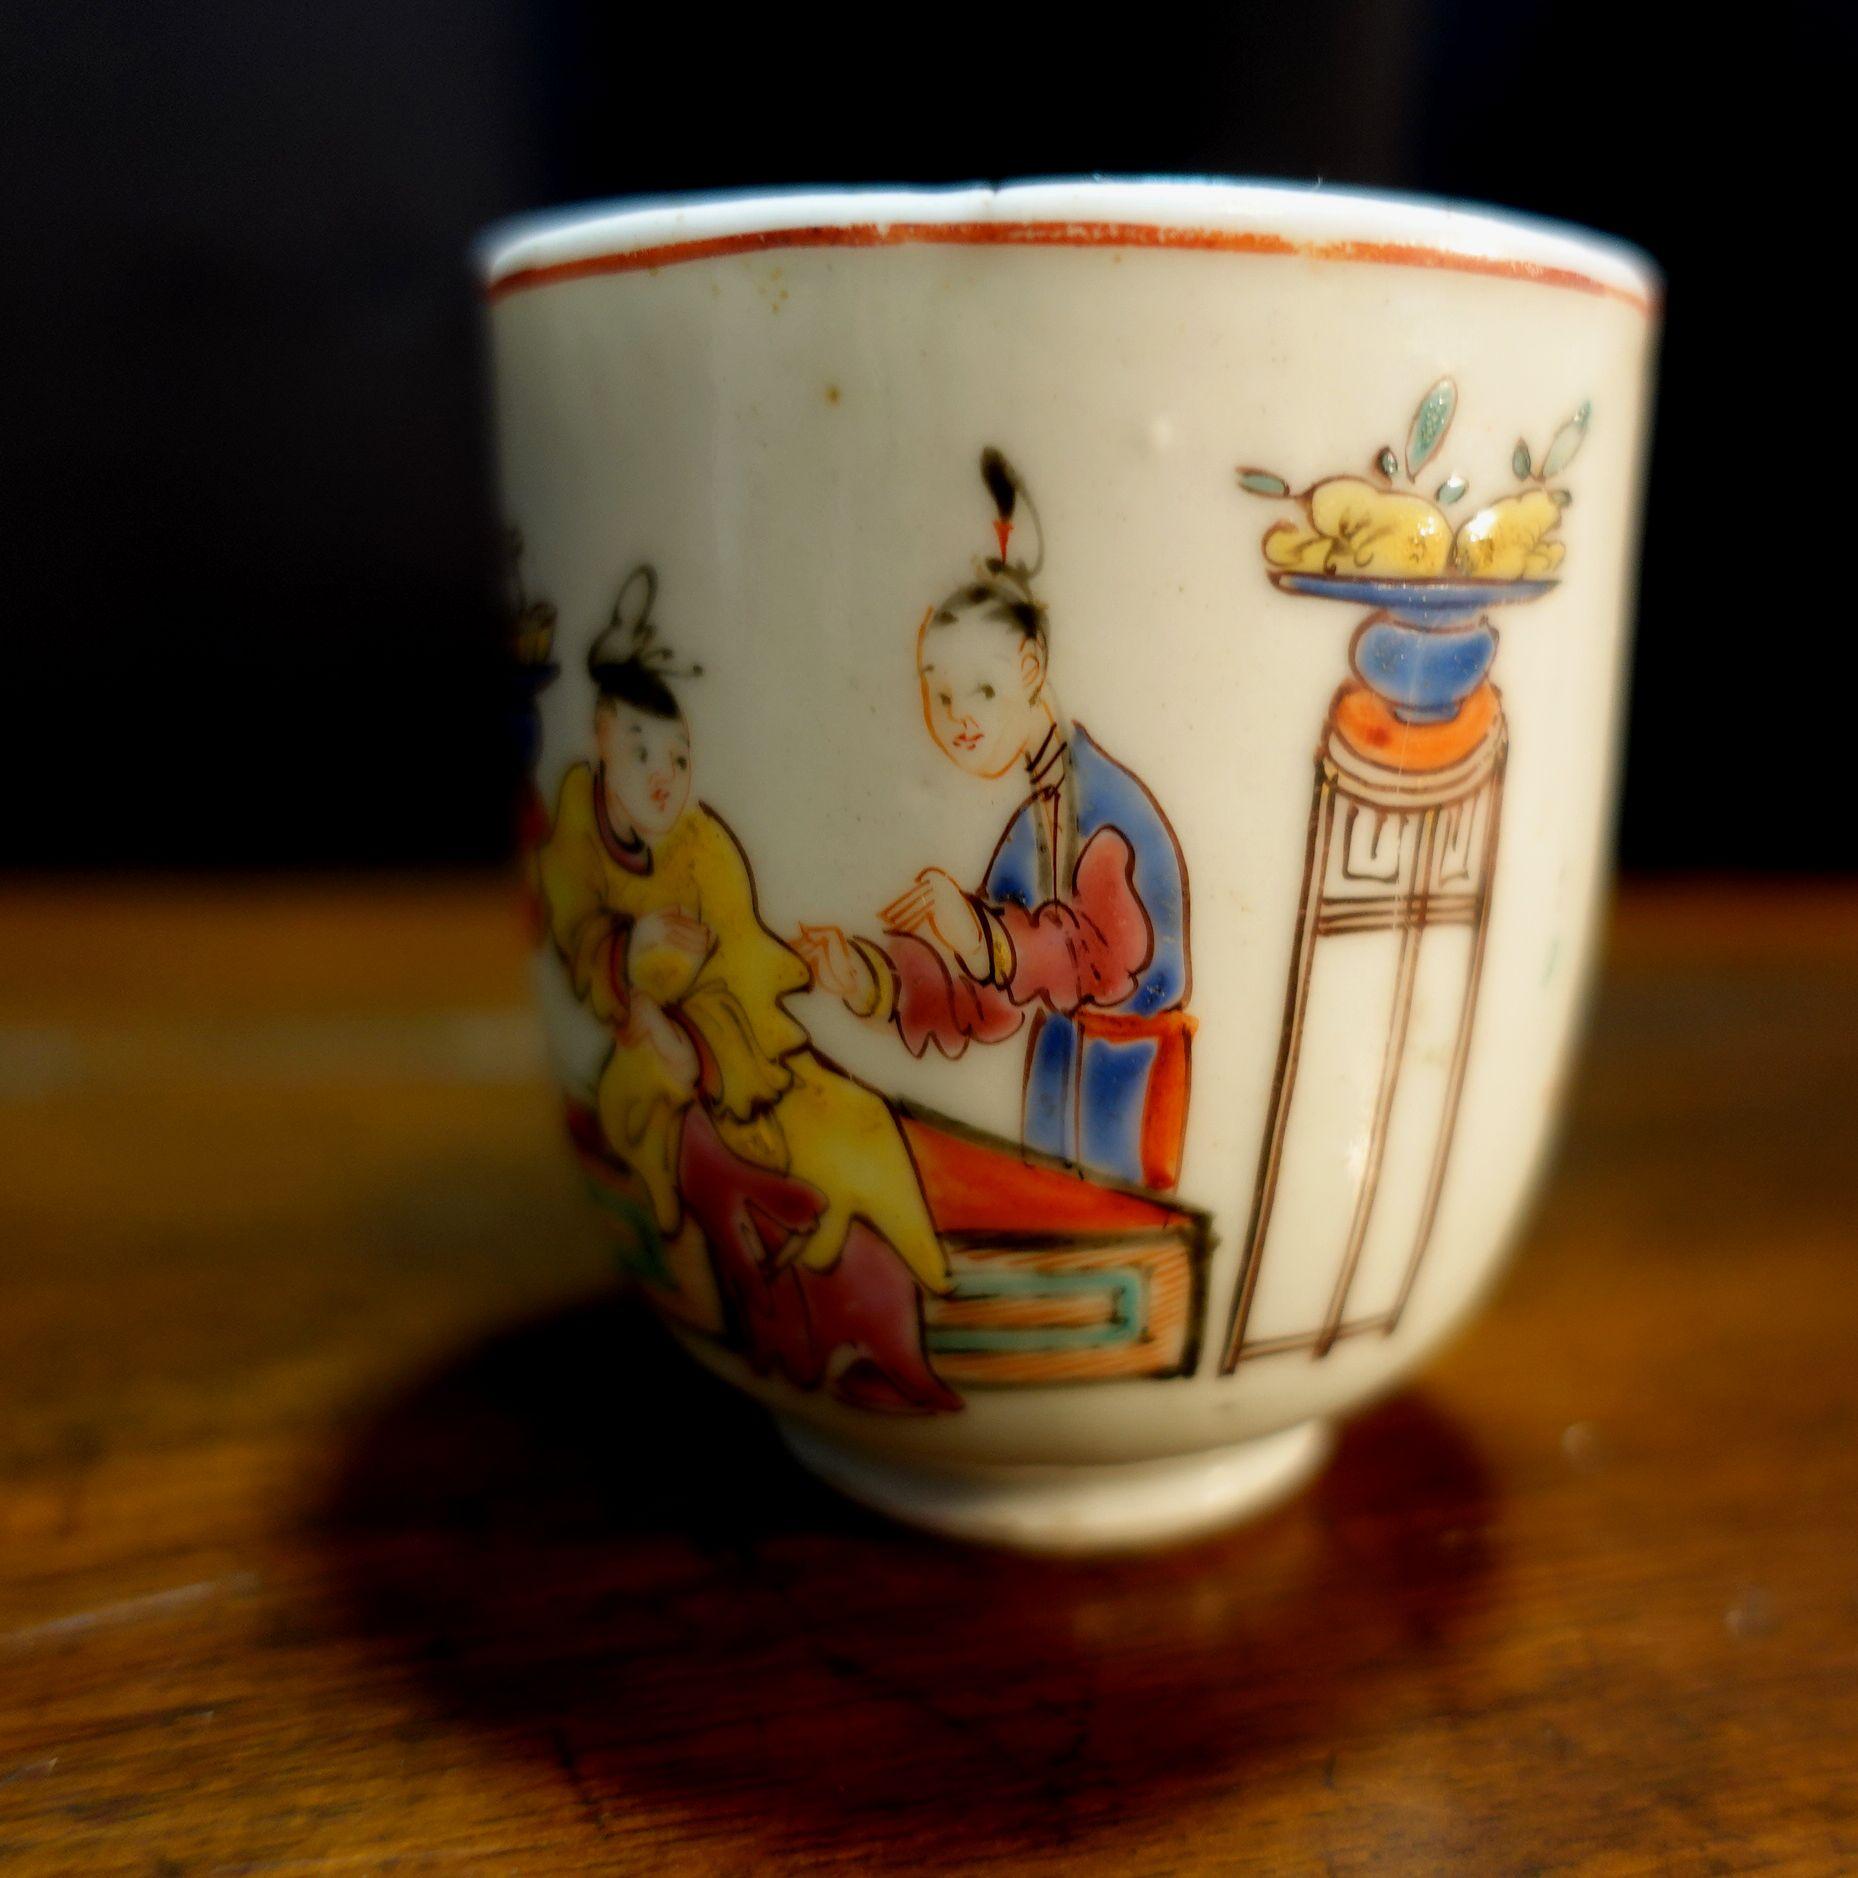 Hand-Painted Antique Cup from 18th Century China